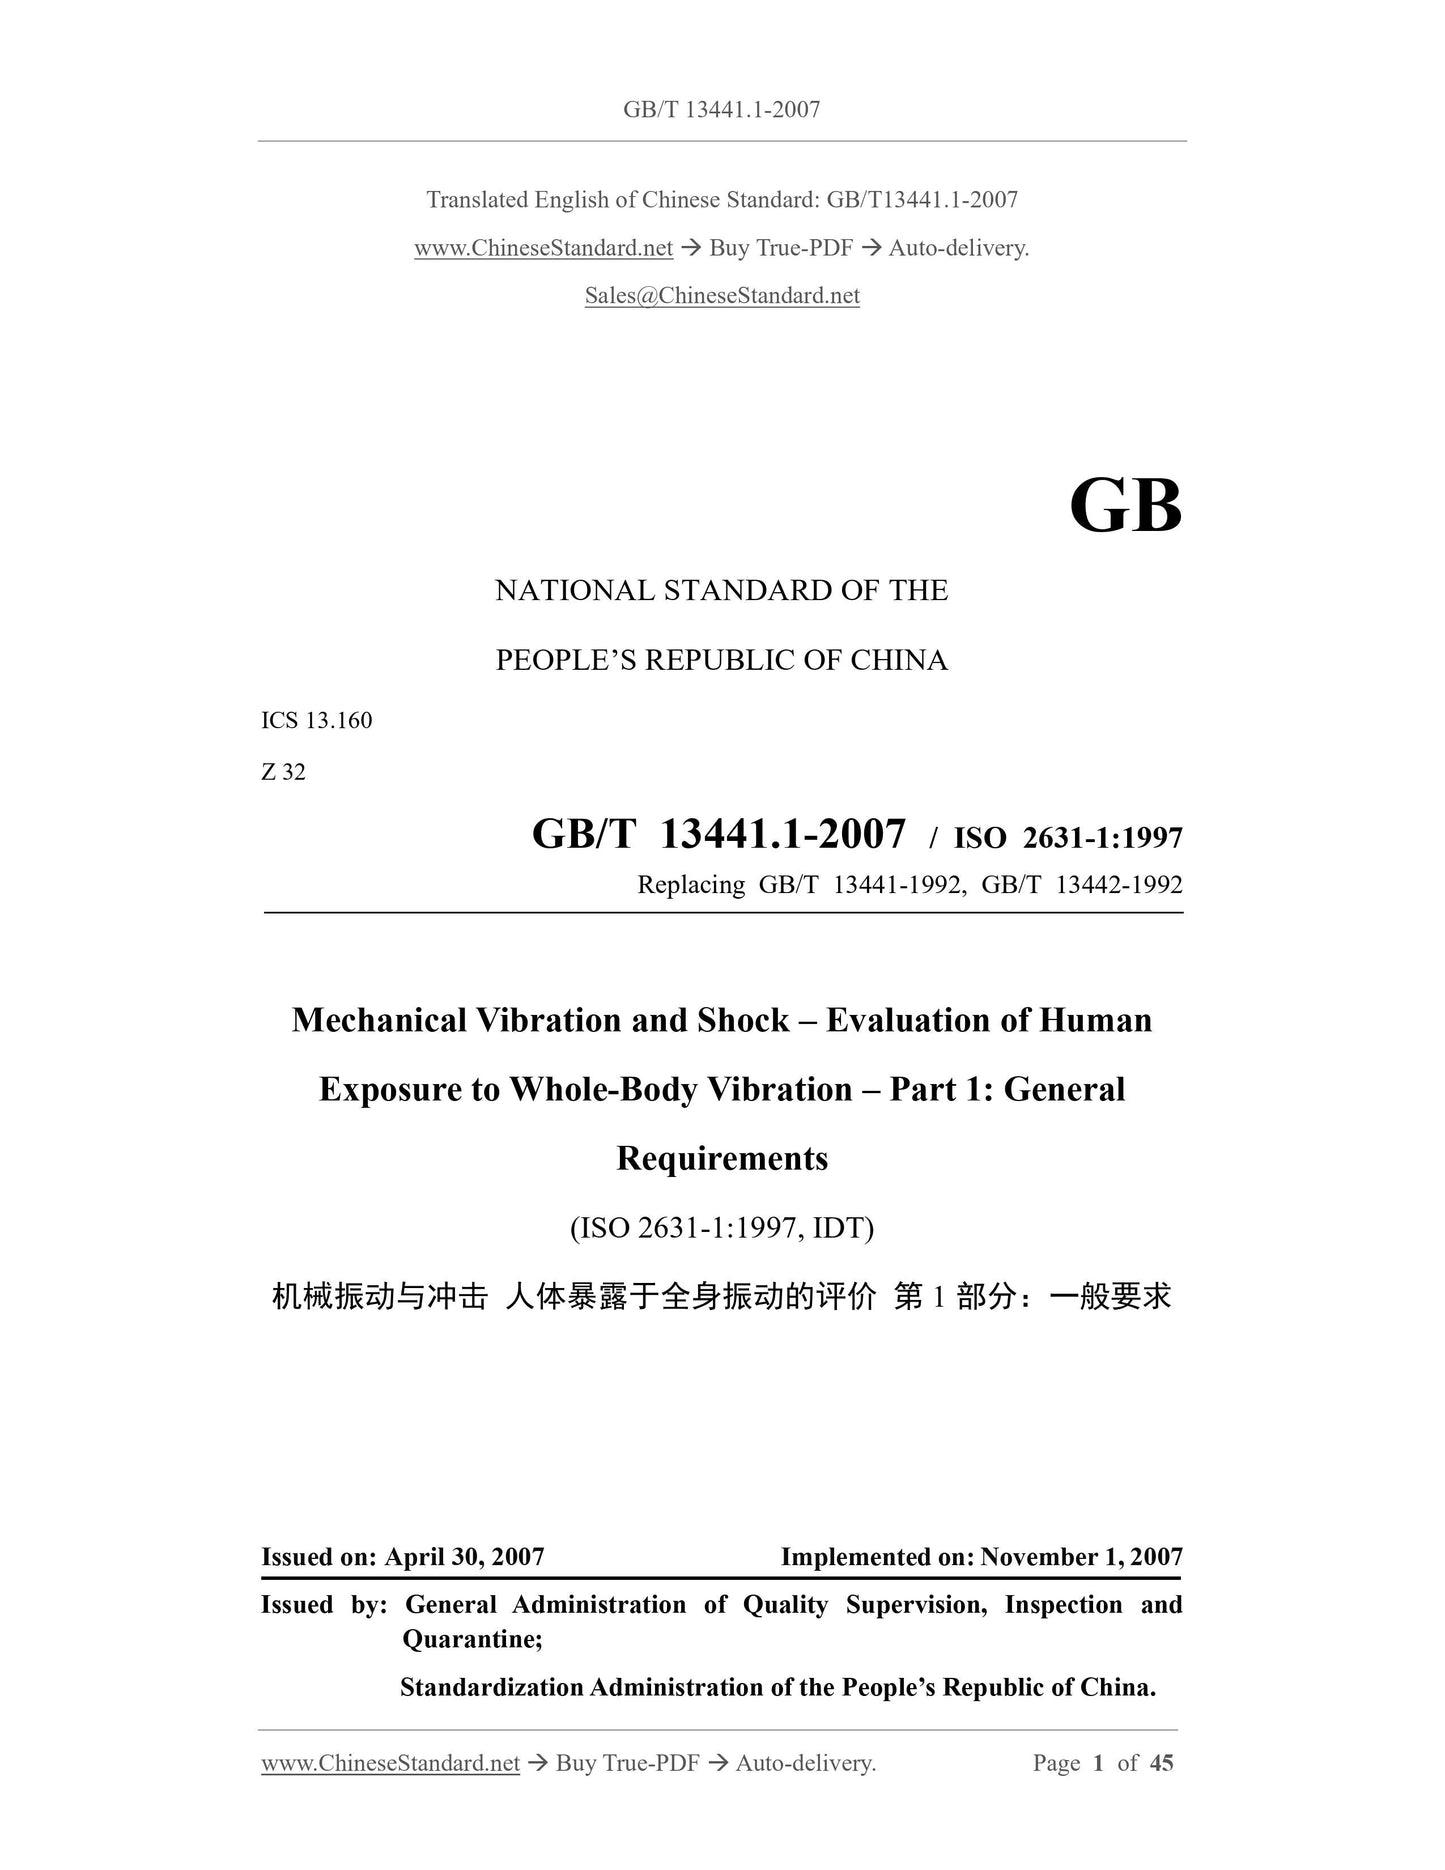 GB/T 13441.1-2007 Page 1